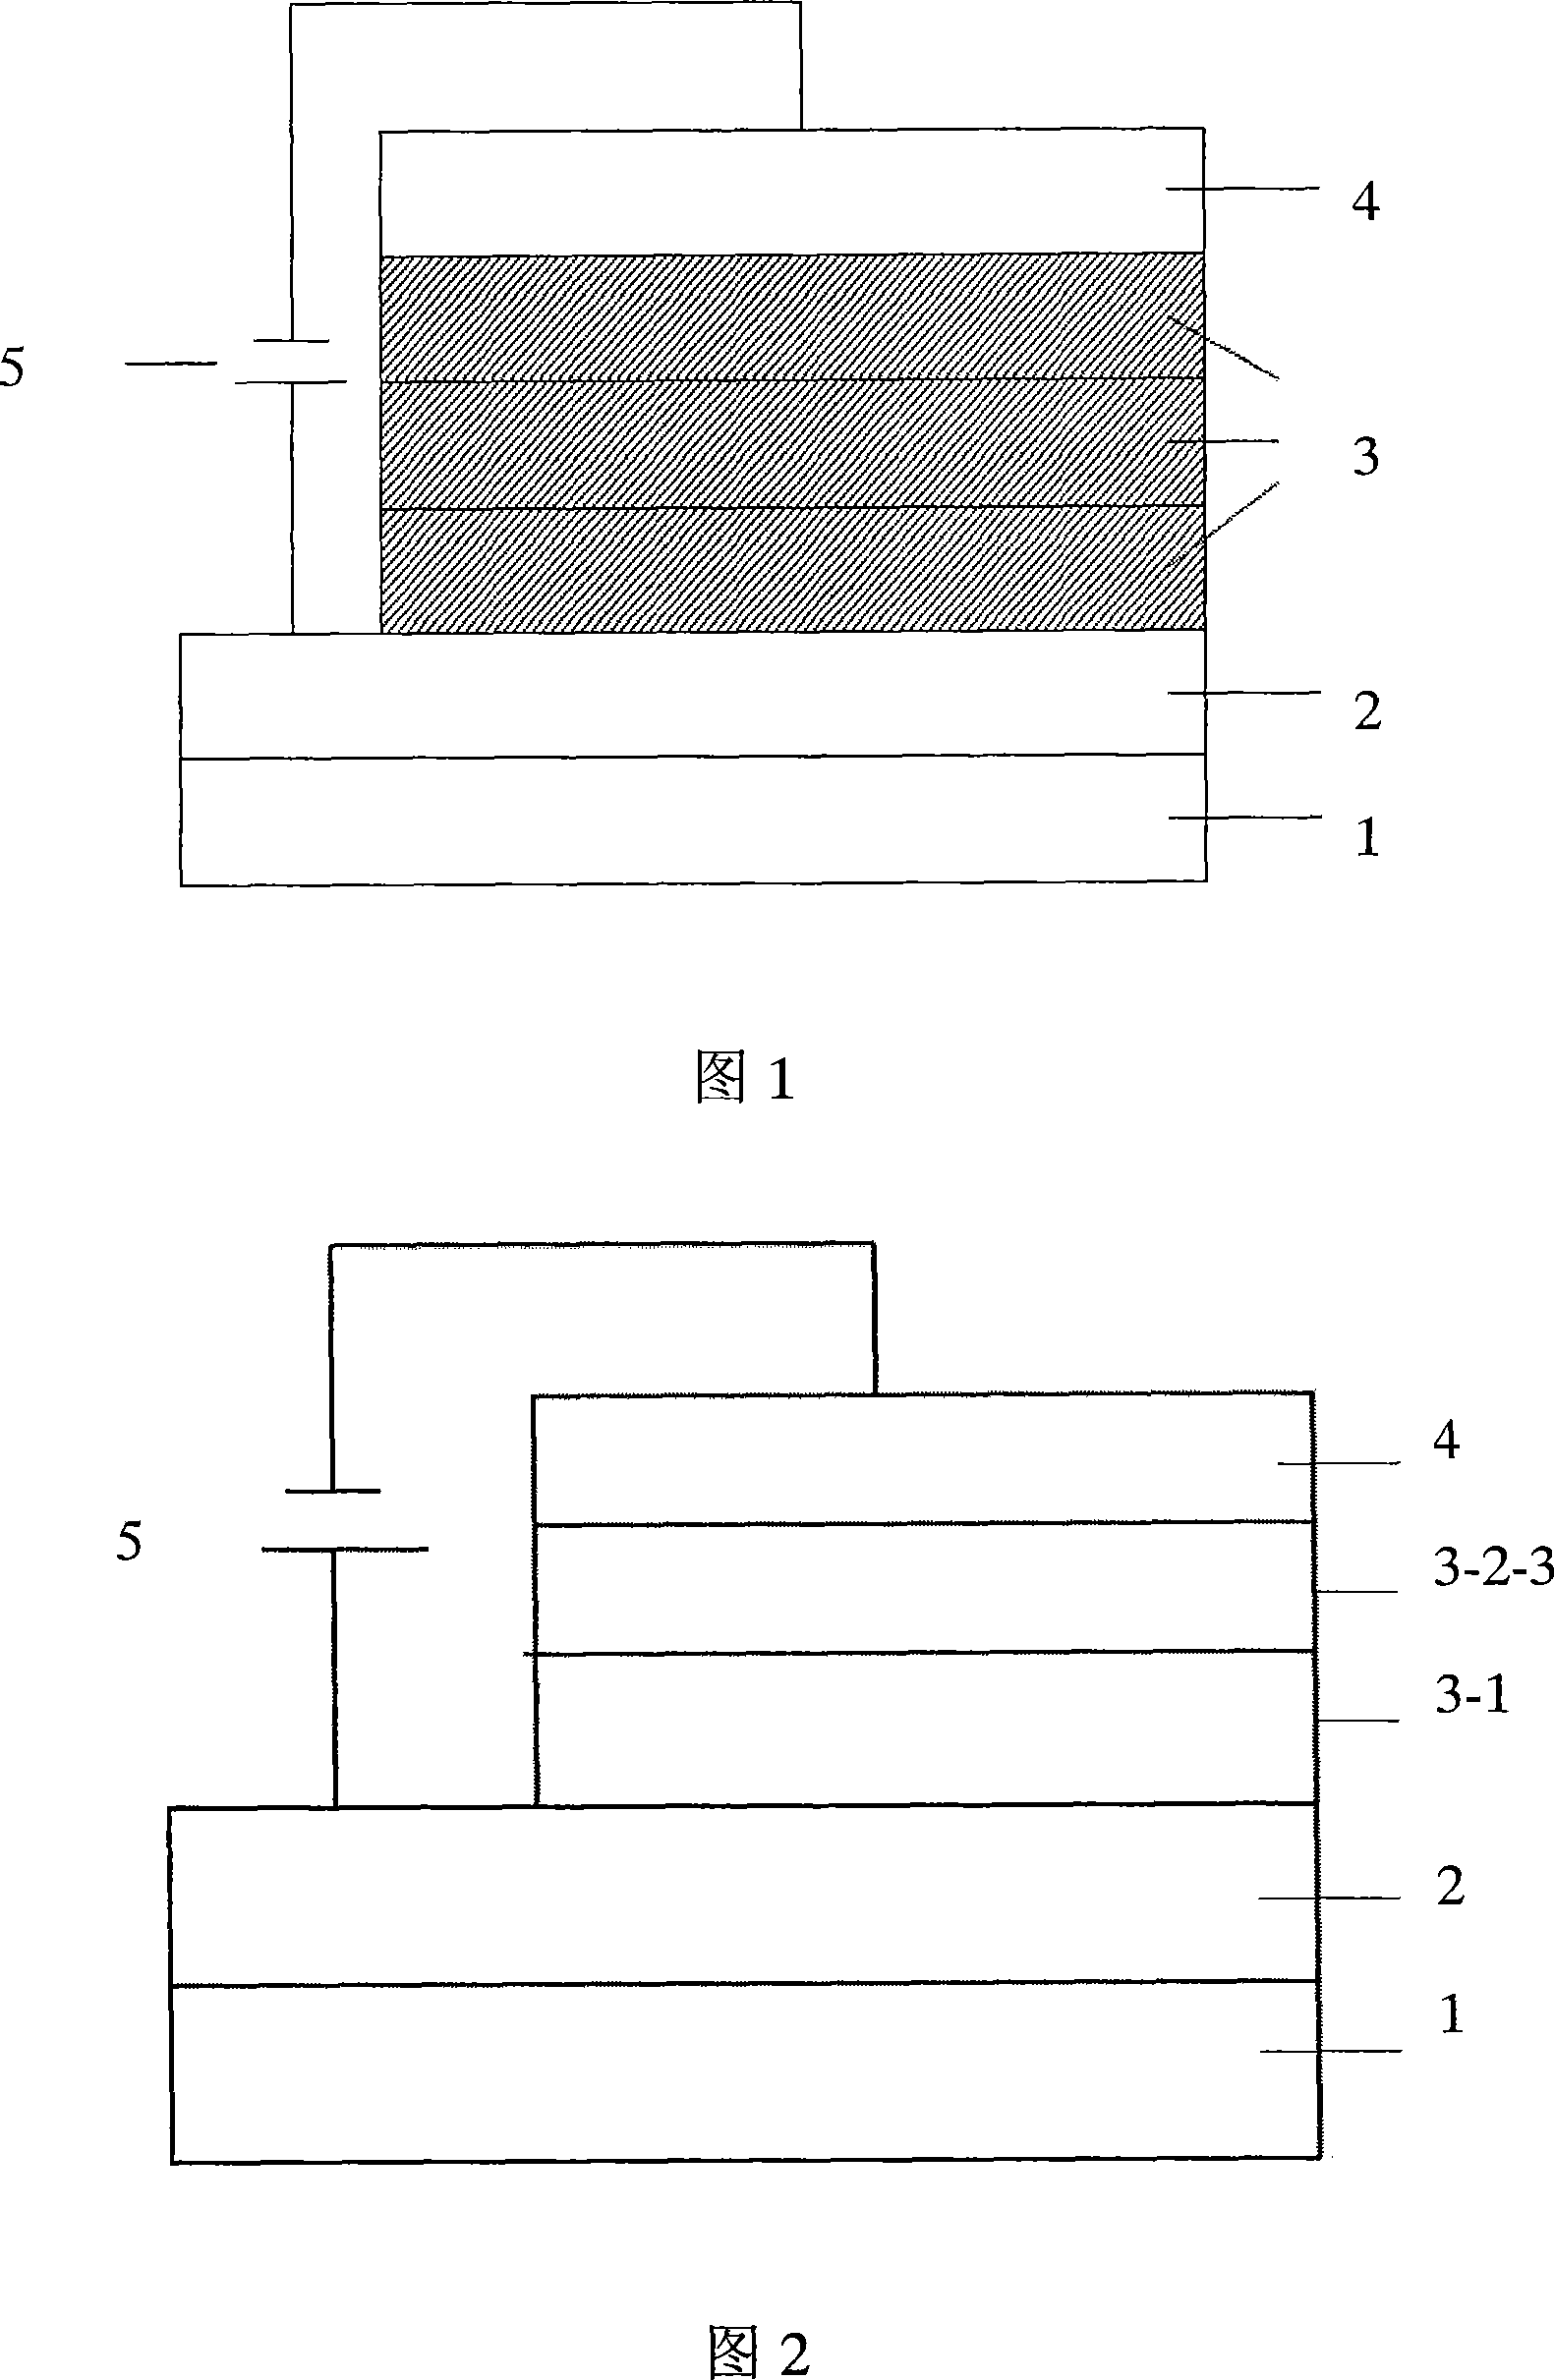 Organic electroluminescent device with hole transmitting regulating and controlling character